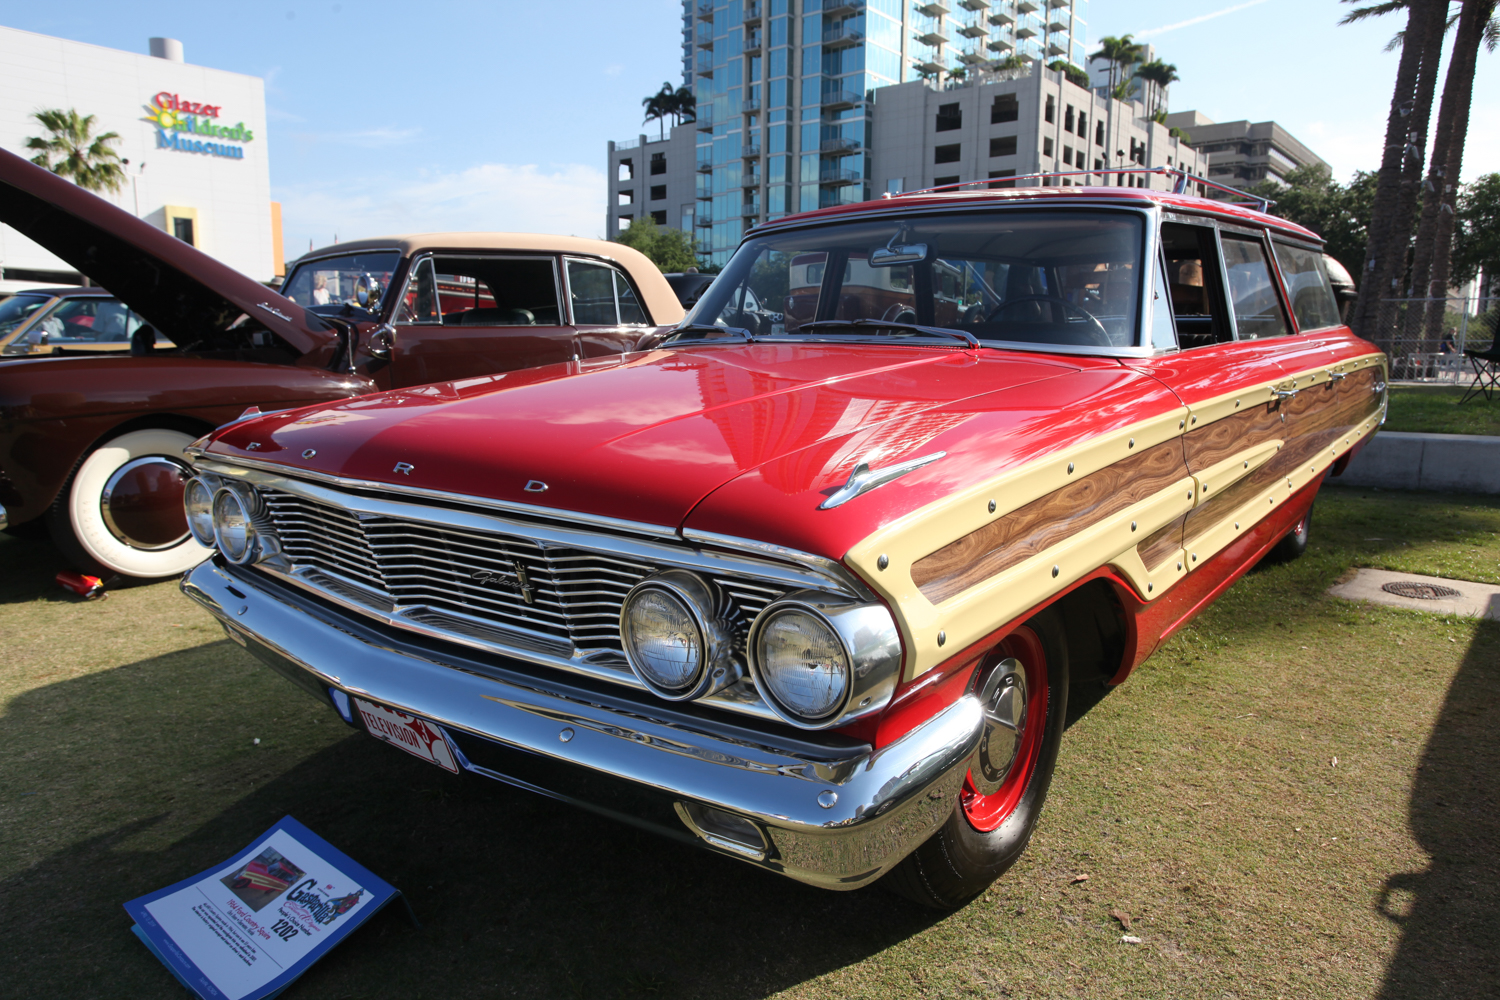 1964 Ford Country Squire.  Because? Well, because I like wagons.